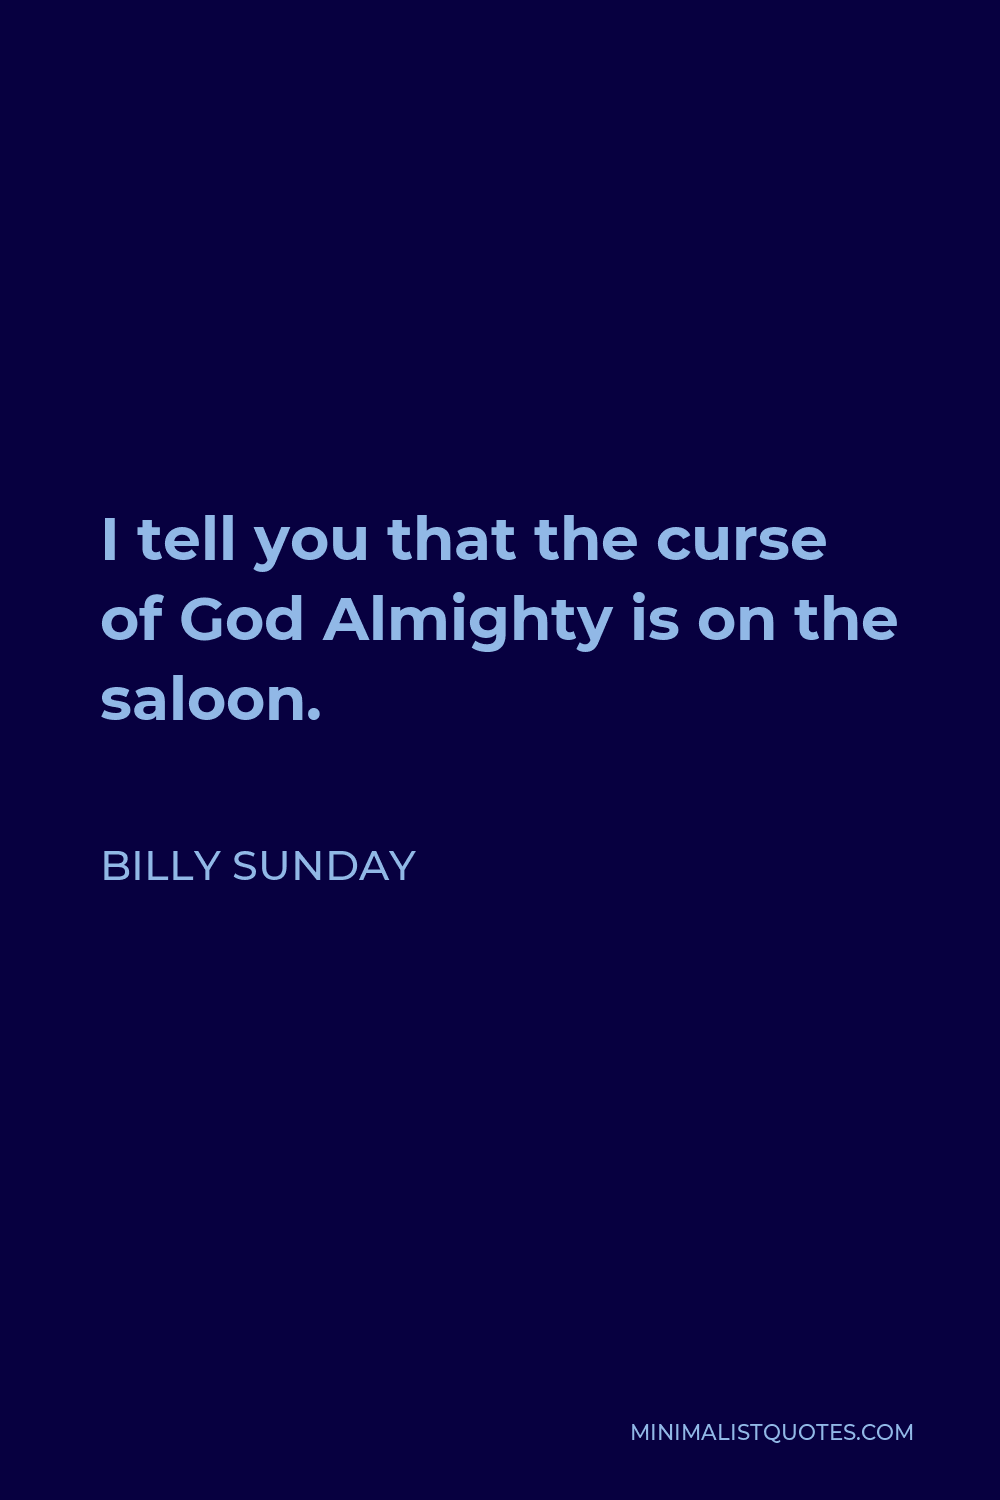 Billy Sunday Quote - I tell you that the curse of God Almighty is on the saloon.